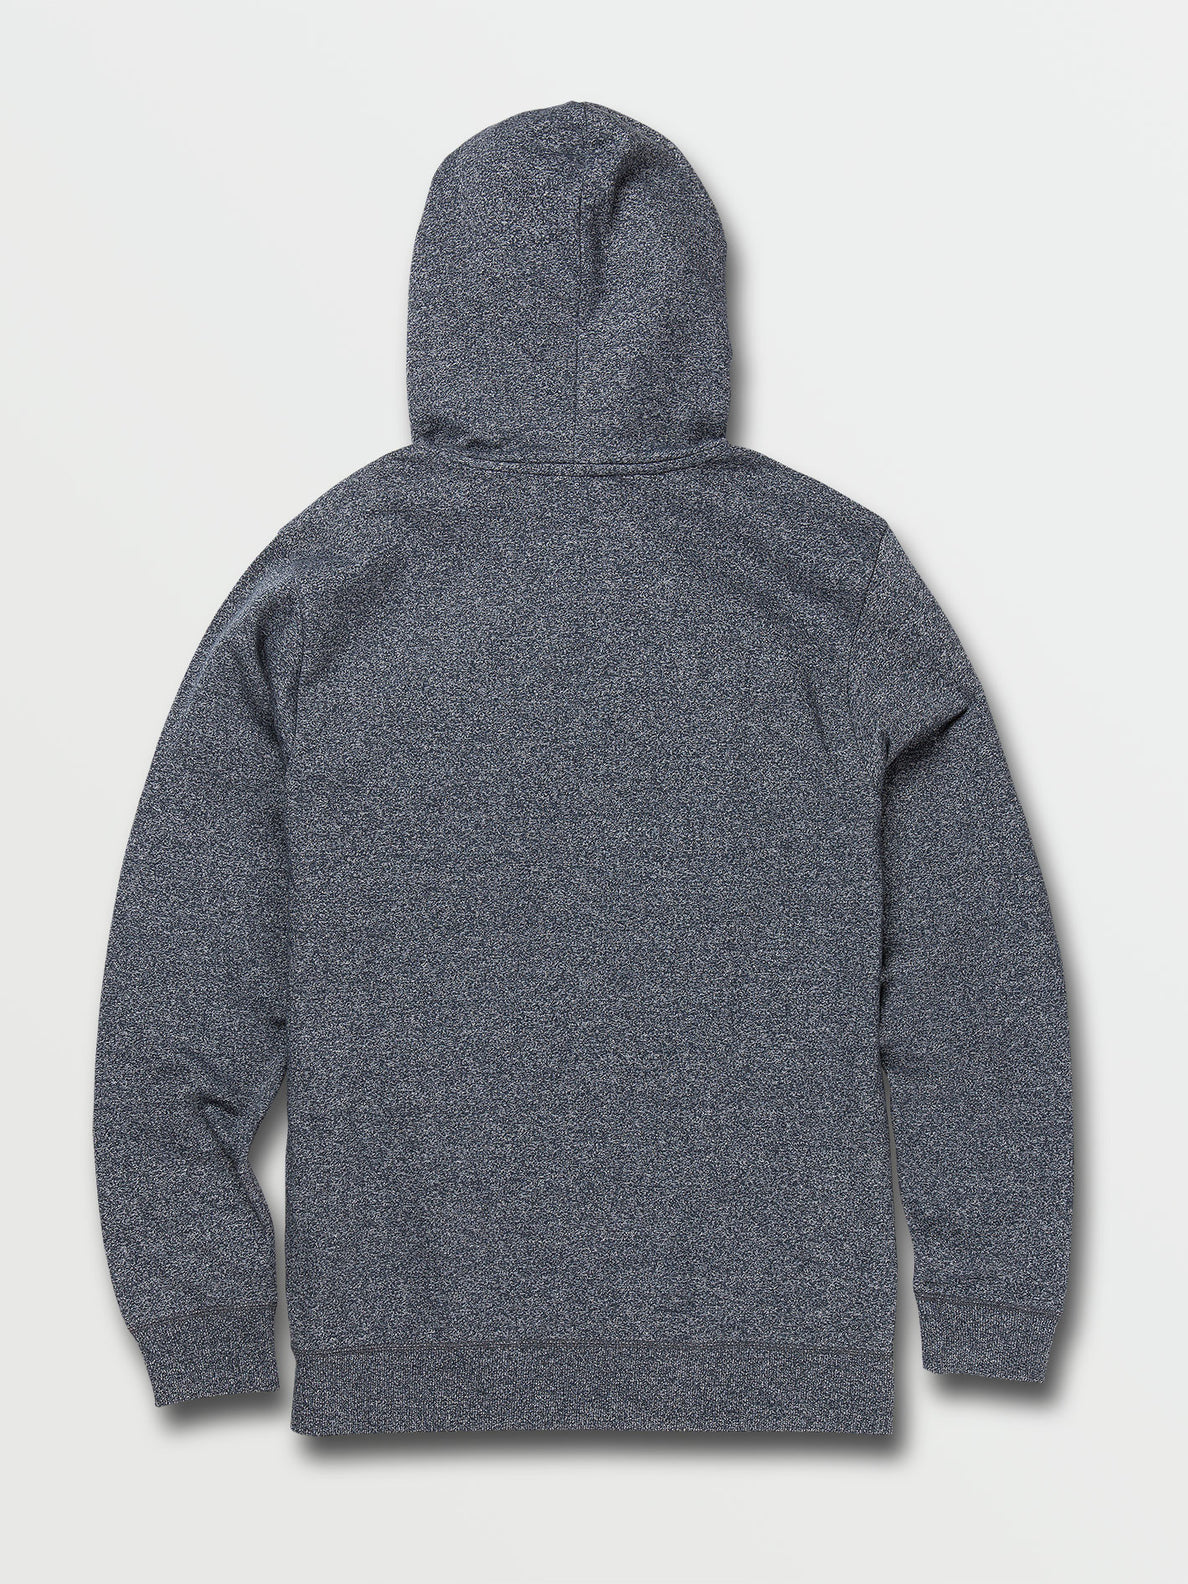 Foreman Static Pullover Fleece Hoodie - Faded Navy (A4102016_FDN) [B]